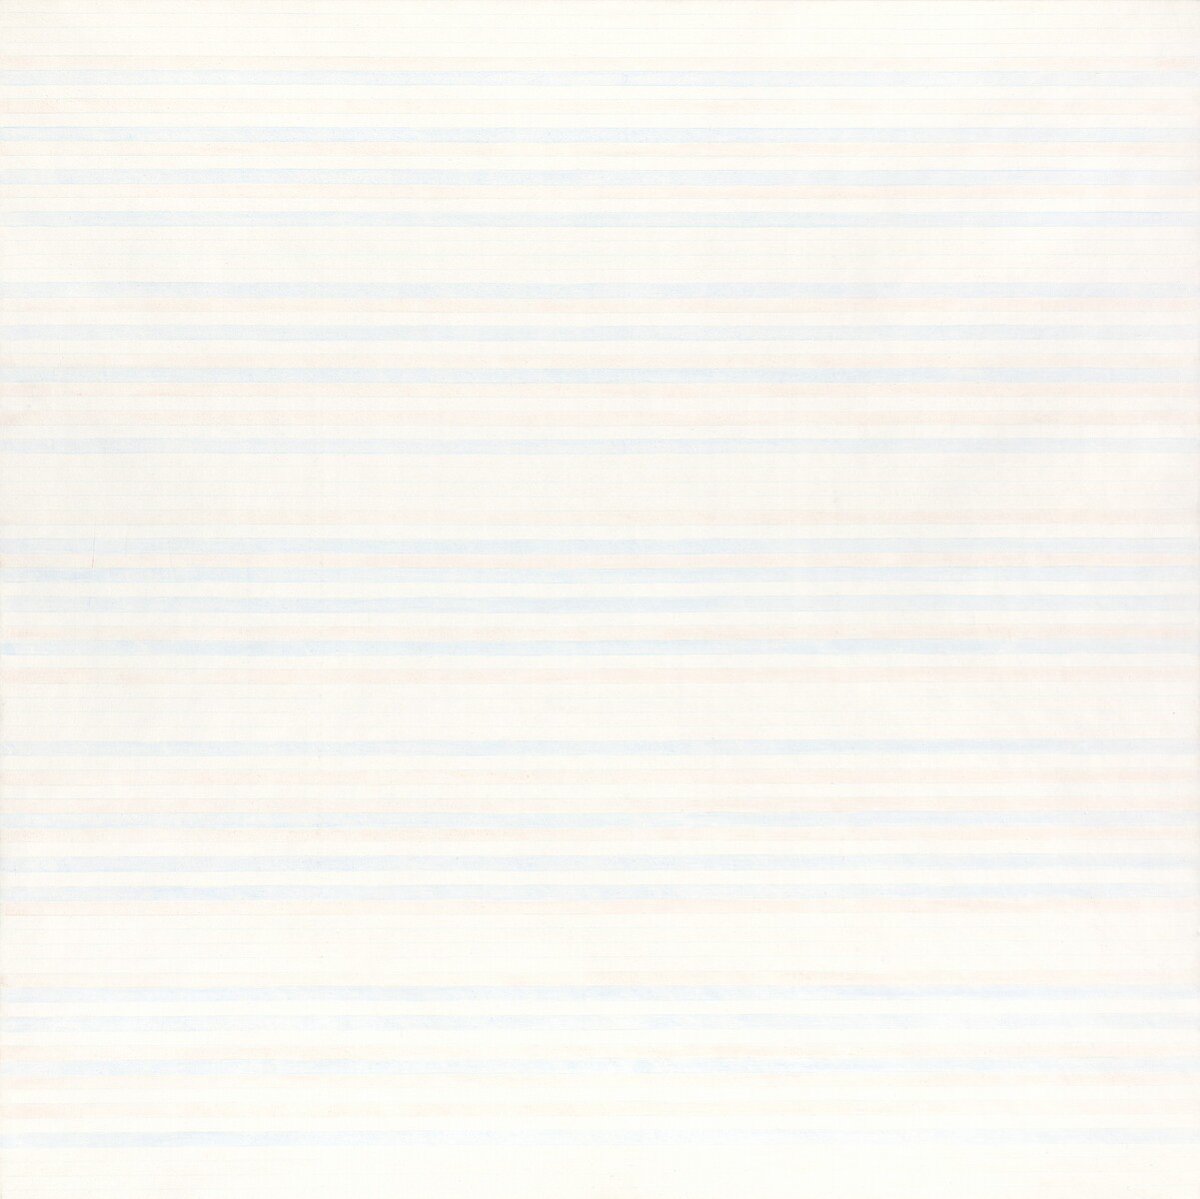 Next up is “Untitled #2” (1981) by Agnes Martin. Her art is notoriously difficult to photograph with its subtle colors and delicate pencil marks. A hybrid of drawing and painting, it connects to Kusama’s art through the deliberate and repetitive way it was made.